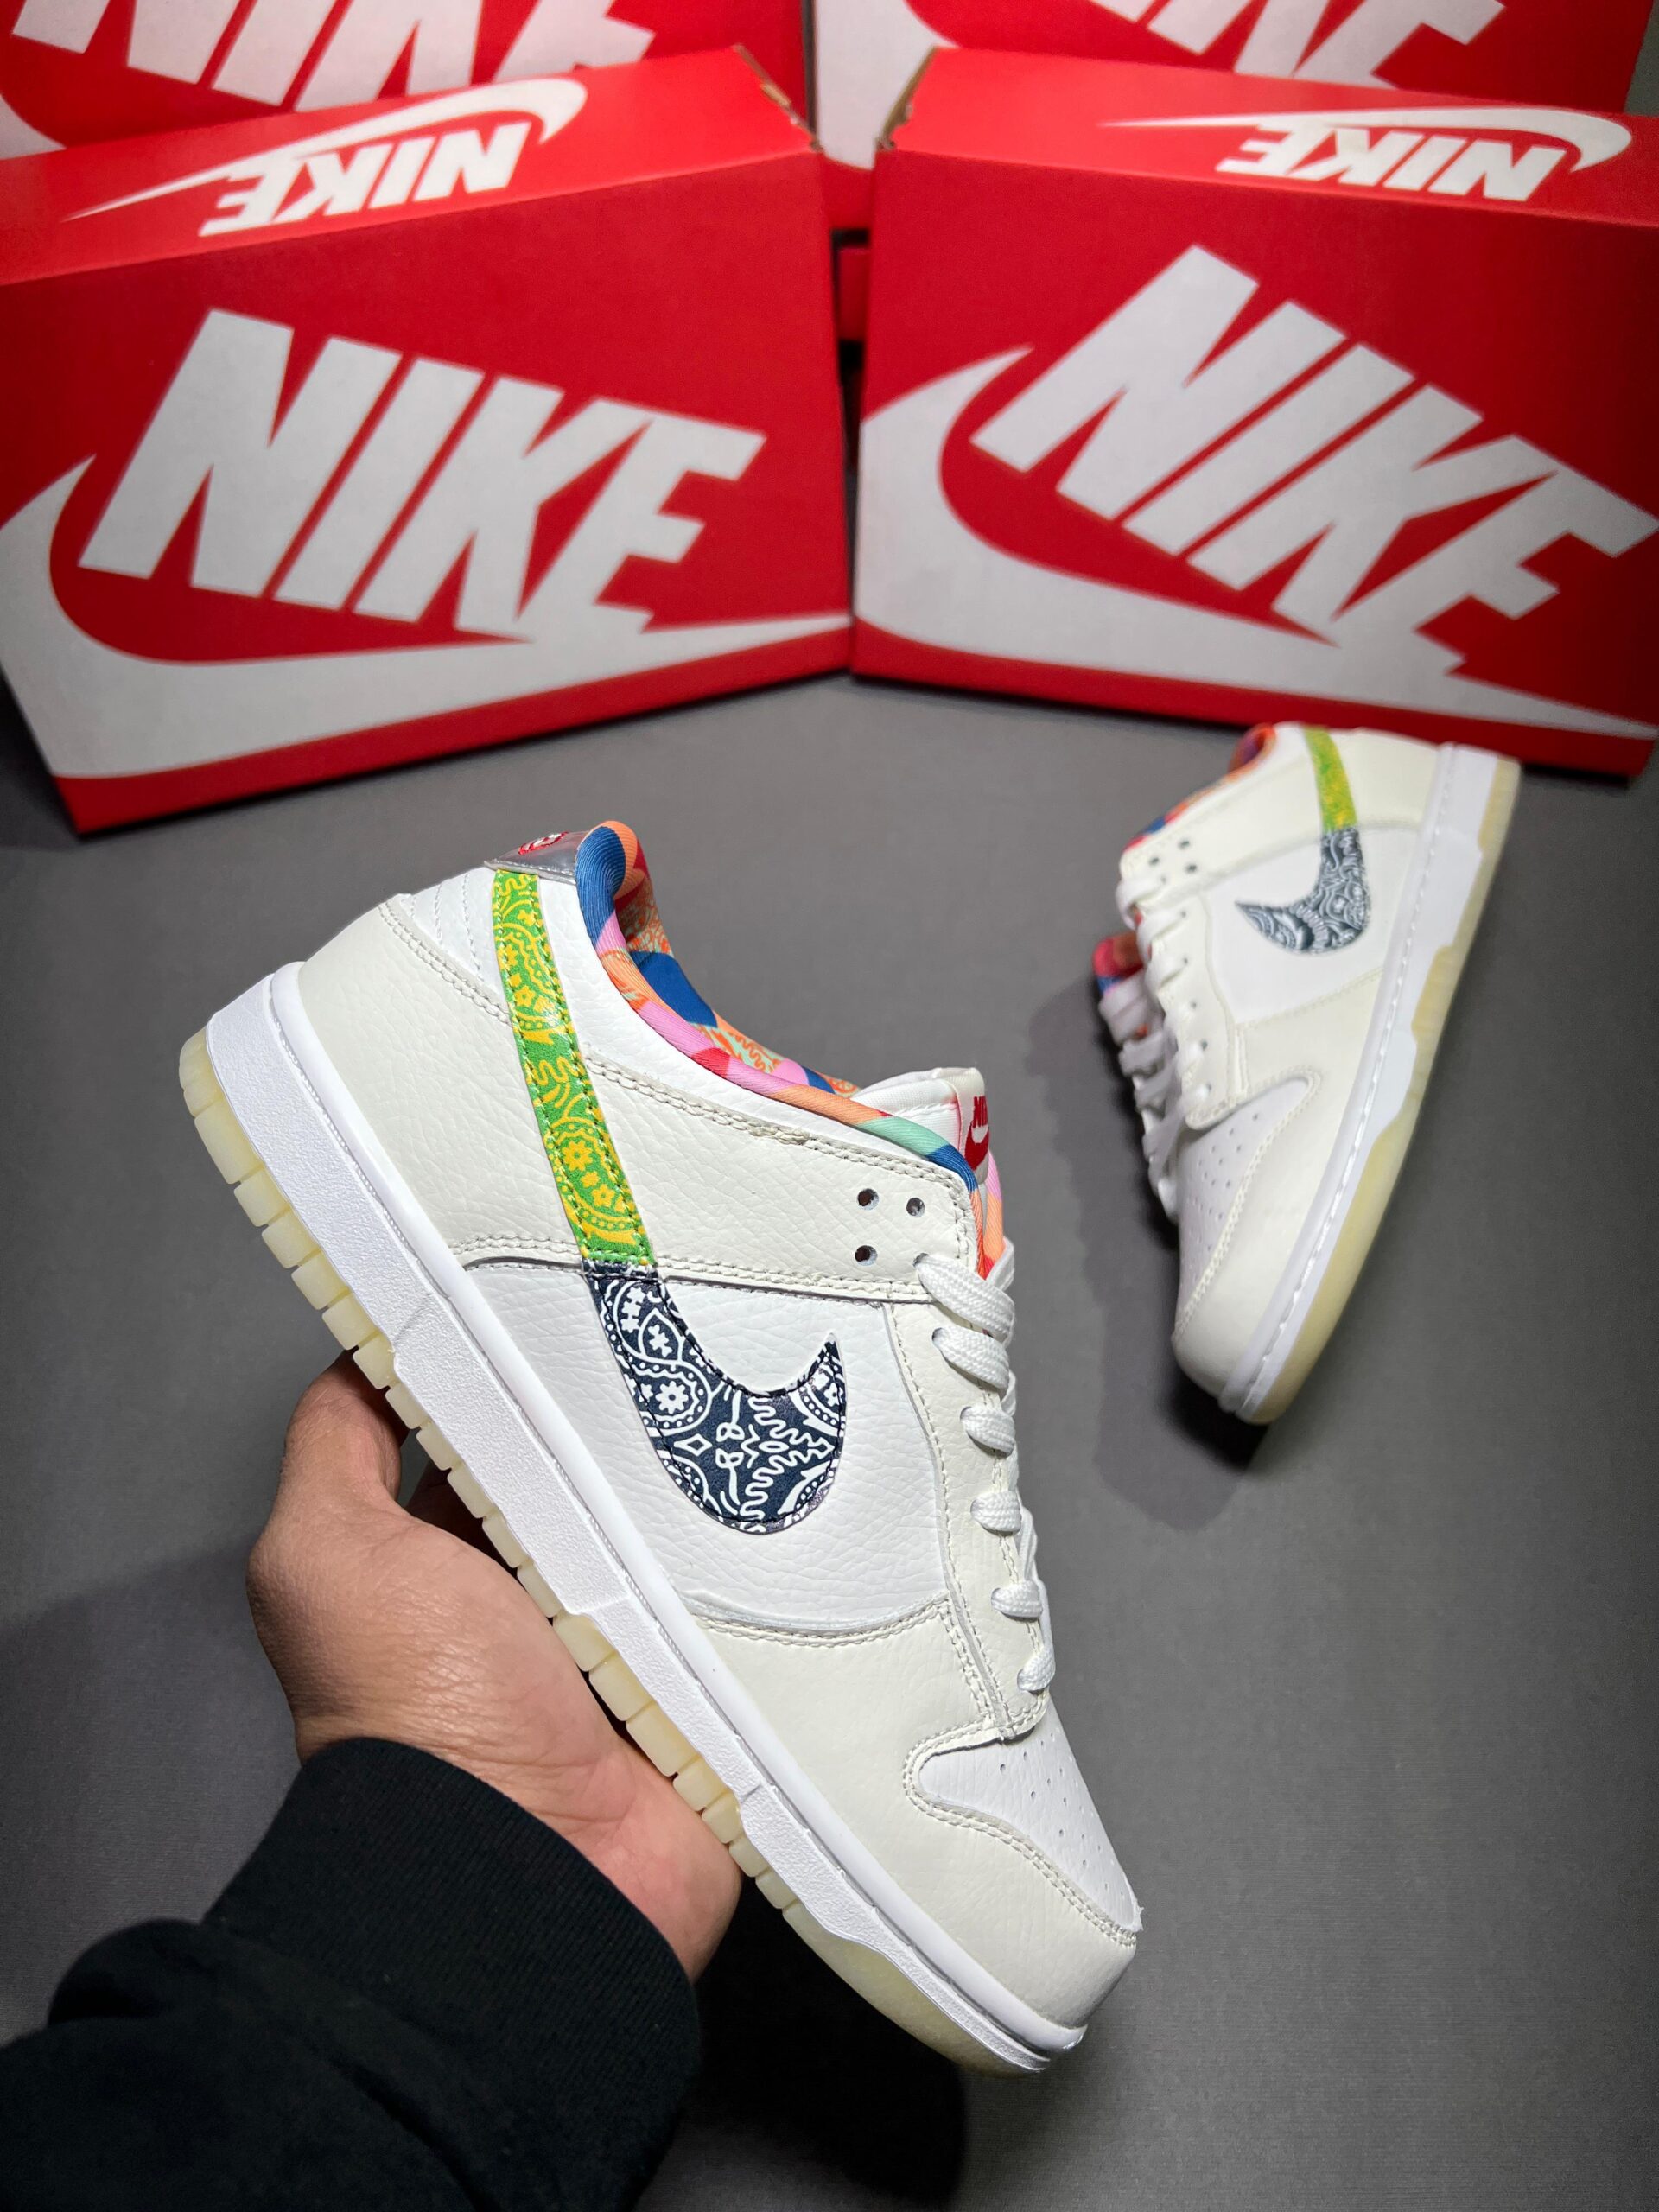 SB Dunk Multi Color Paisley Shoes In Stock